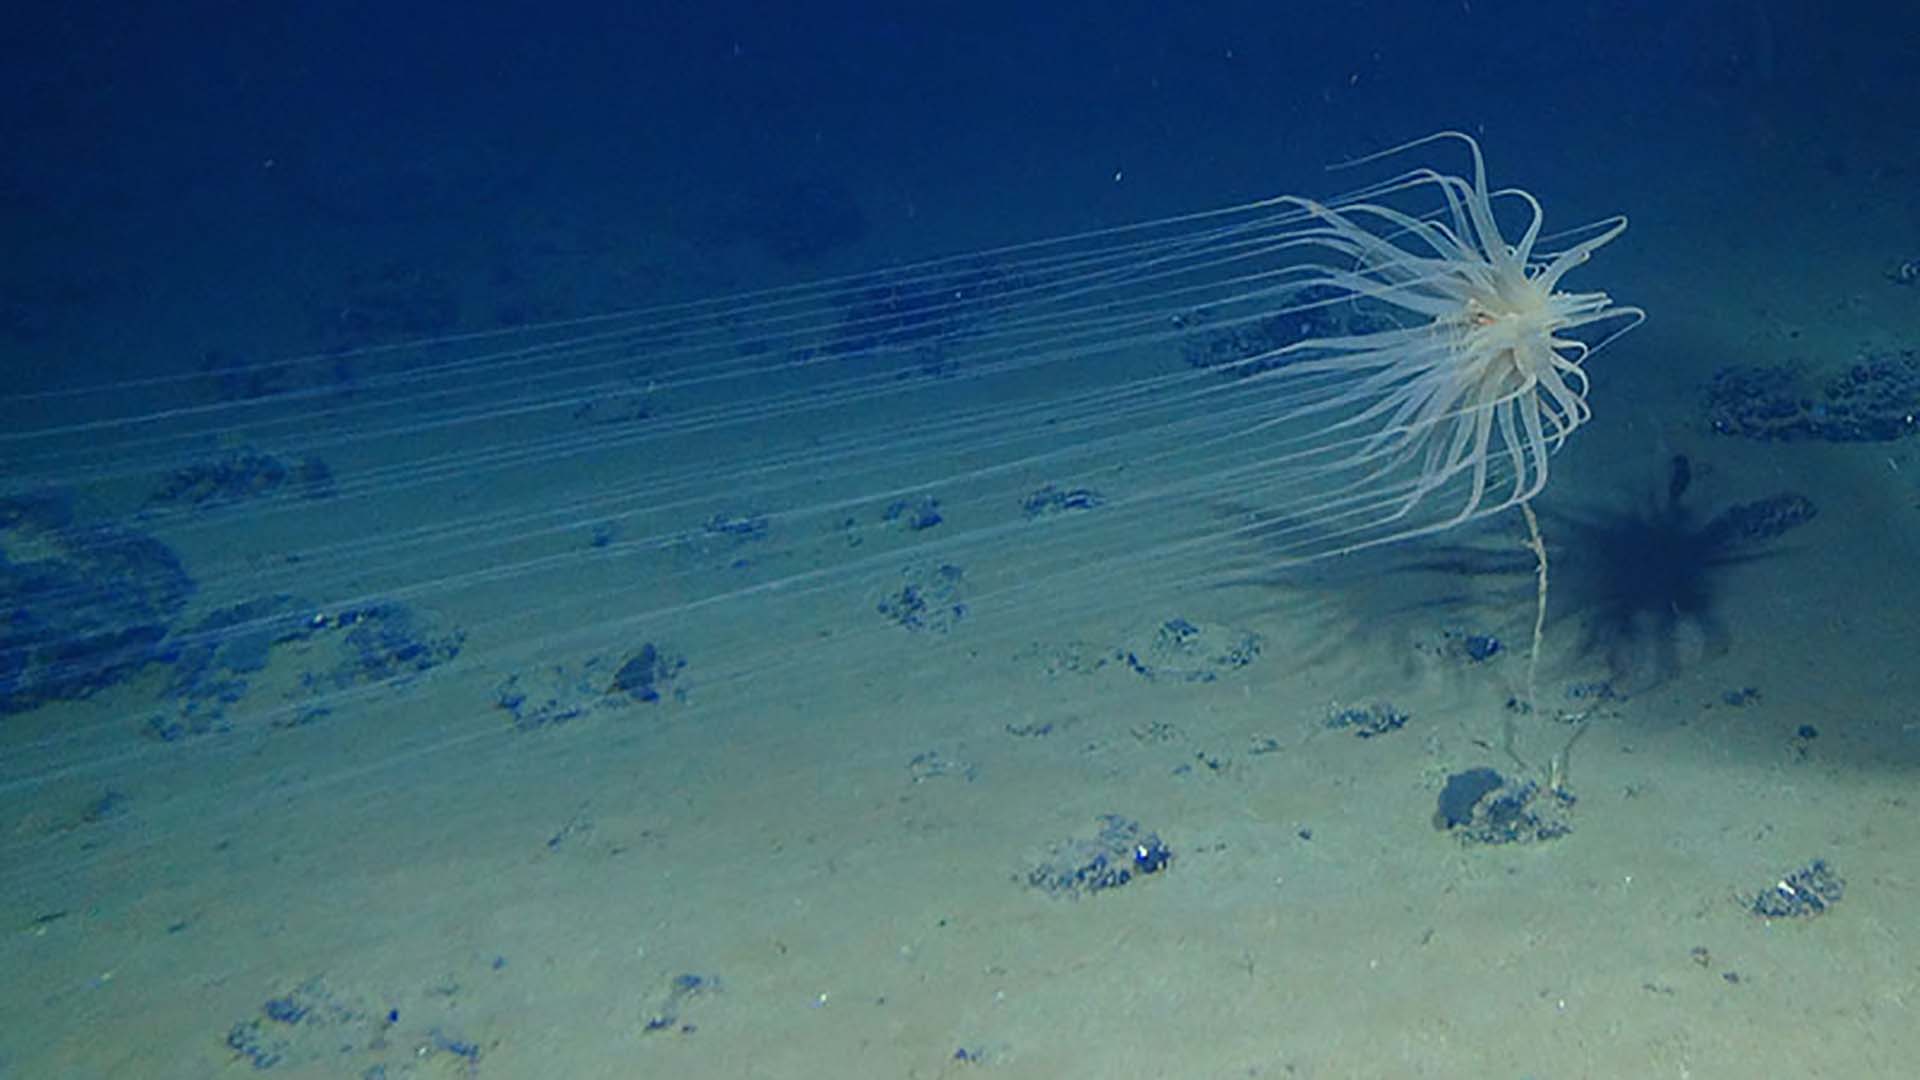 Relicanthus sp.-a new species from a new order of Cnidaria collected at 4,100 meters in the Clarion-Clipperton Fracture Zone (CCZ) that lives on sponge stalks attached to nodules. (Image courtesy of Craig Smith and Diva Amon, ABYSSLINE Project, NOAA)